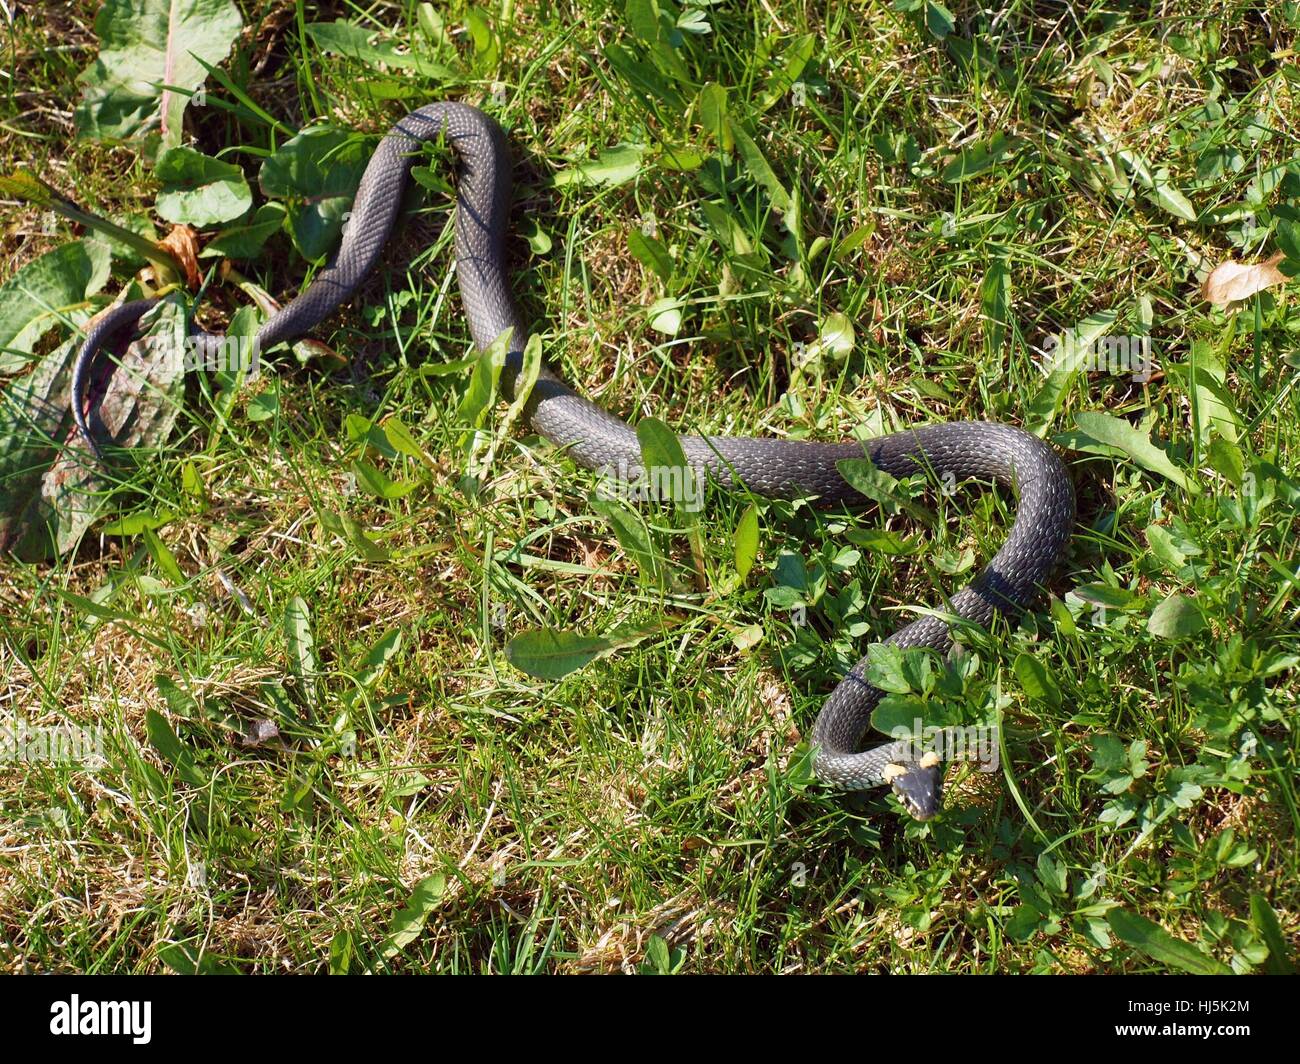 reptile, snake, lawn, green, forest, danger, beautiful, beauteously, nice, big, Stock Photo